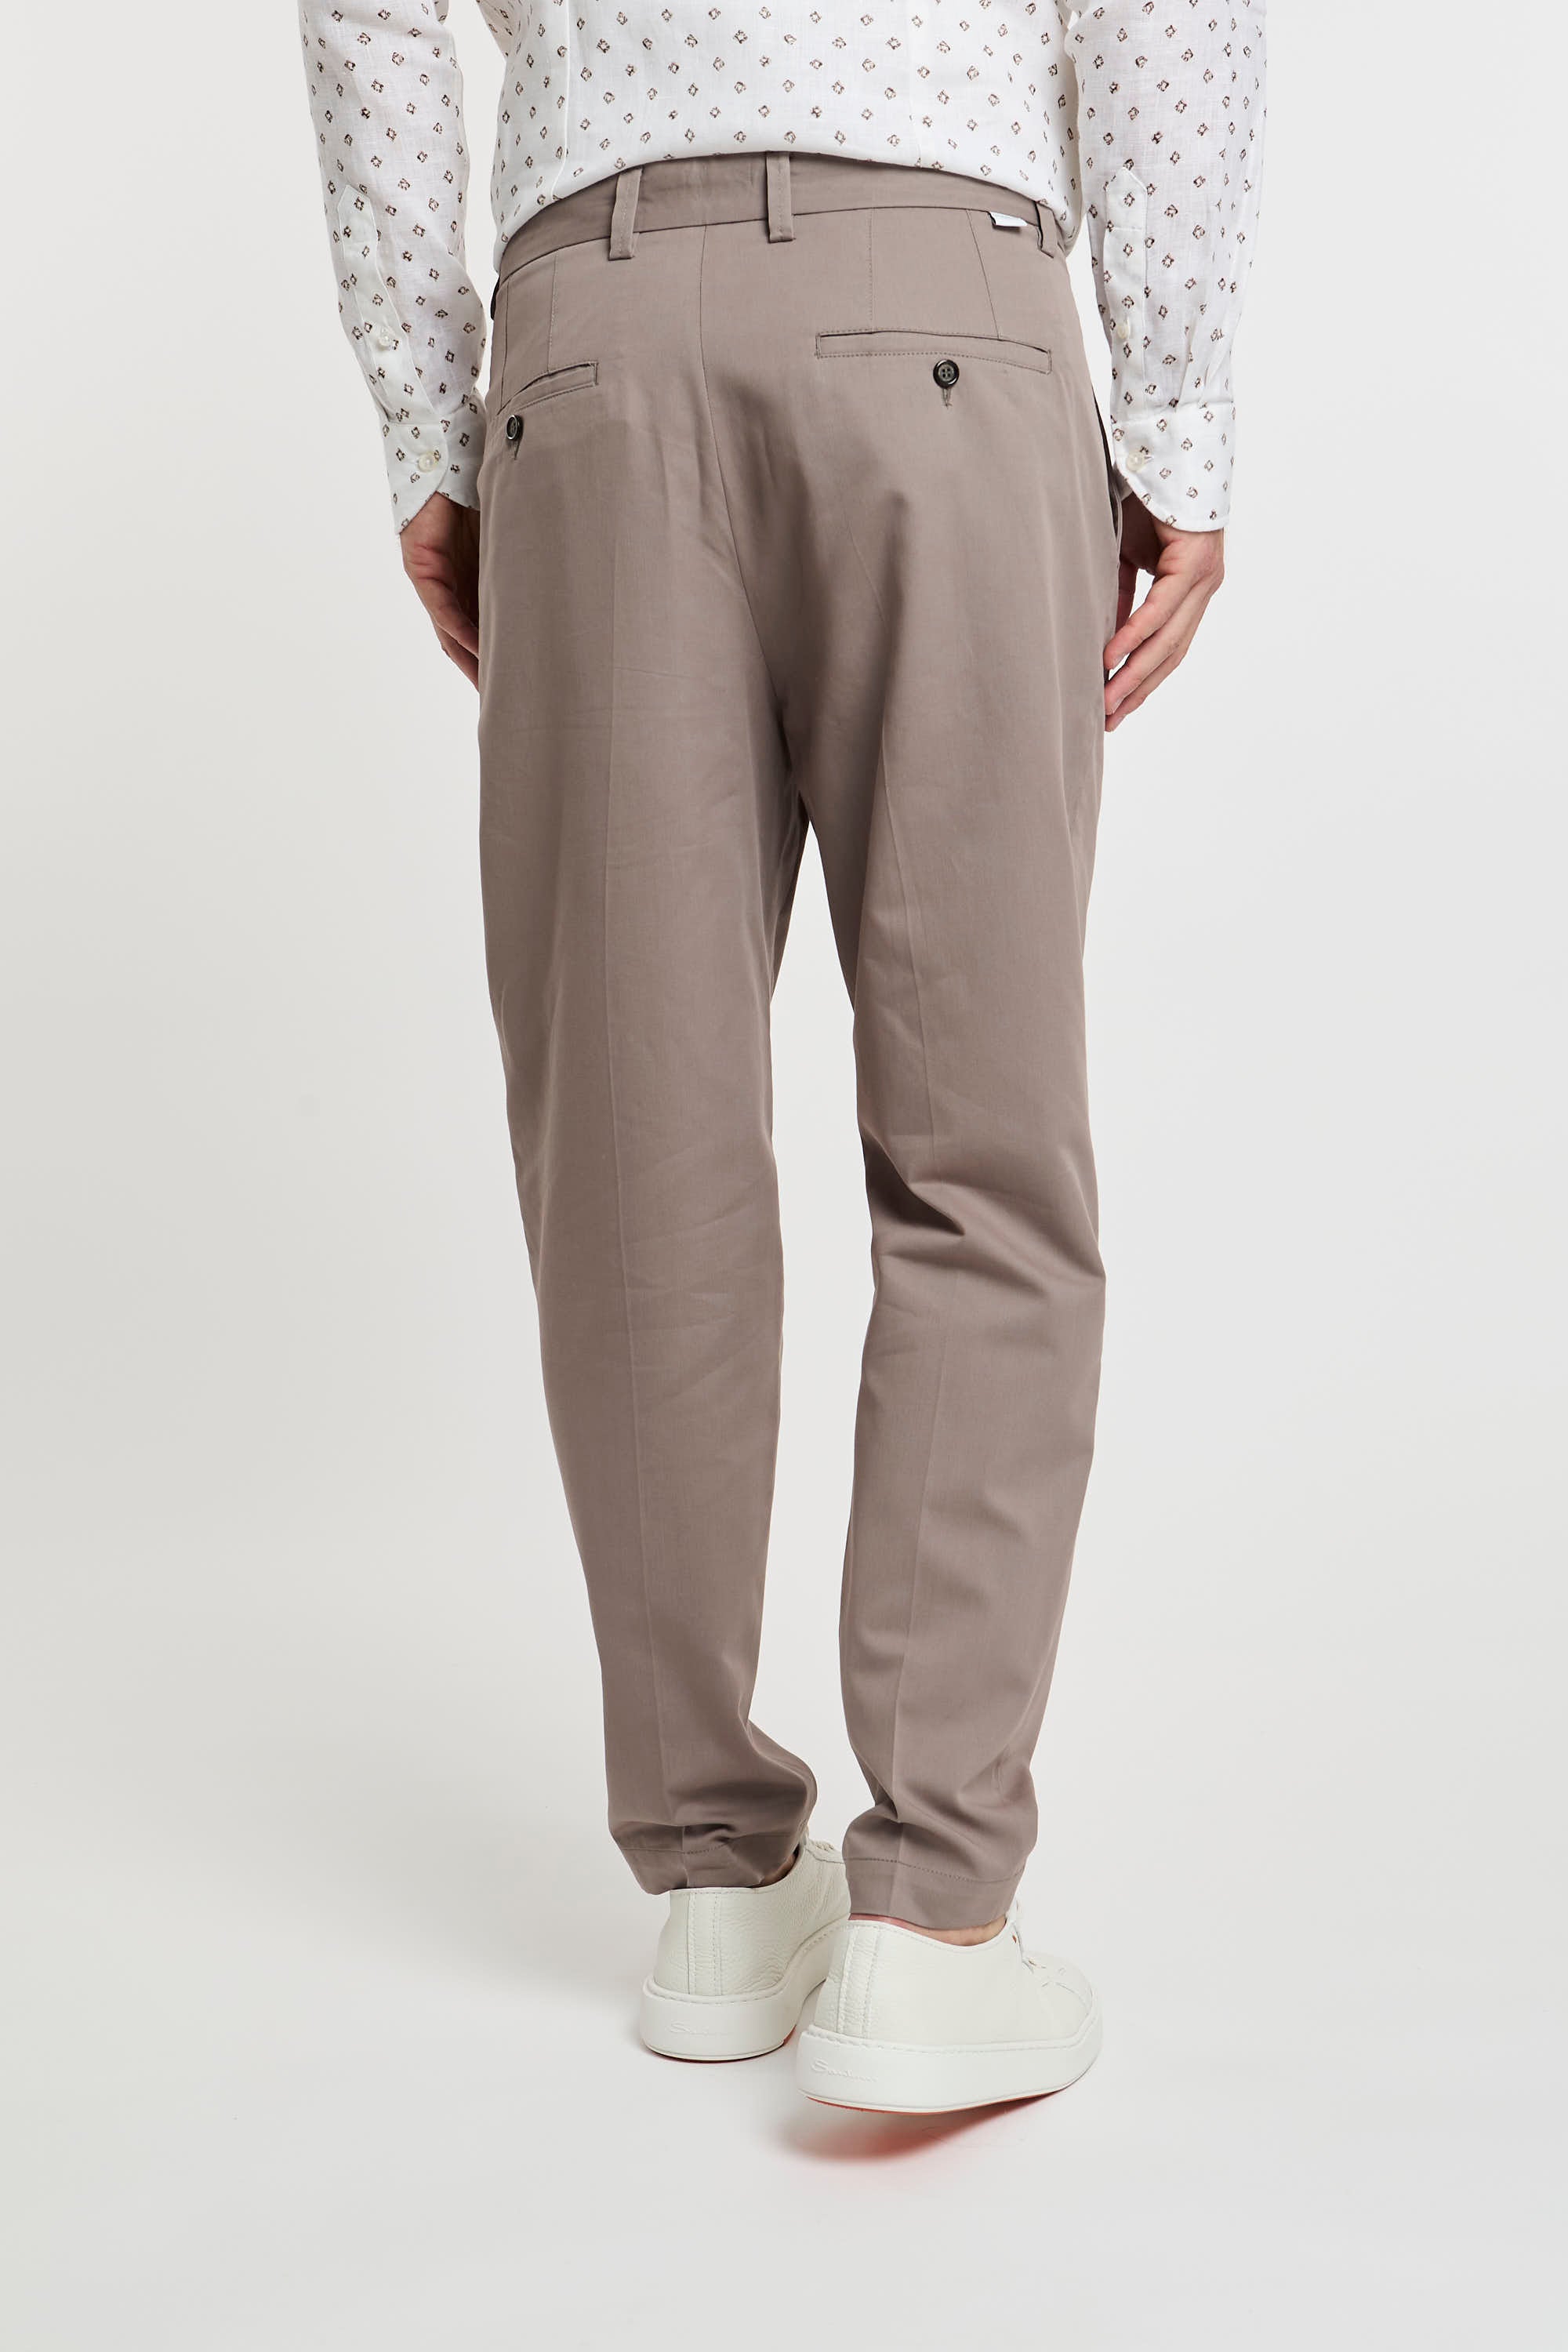 Paolo Pecora Cotton Blend Chino Trousers in Taupe-5